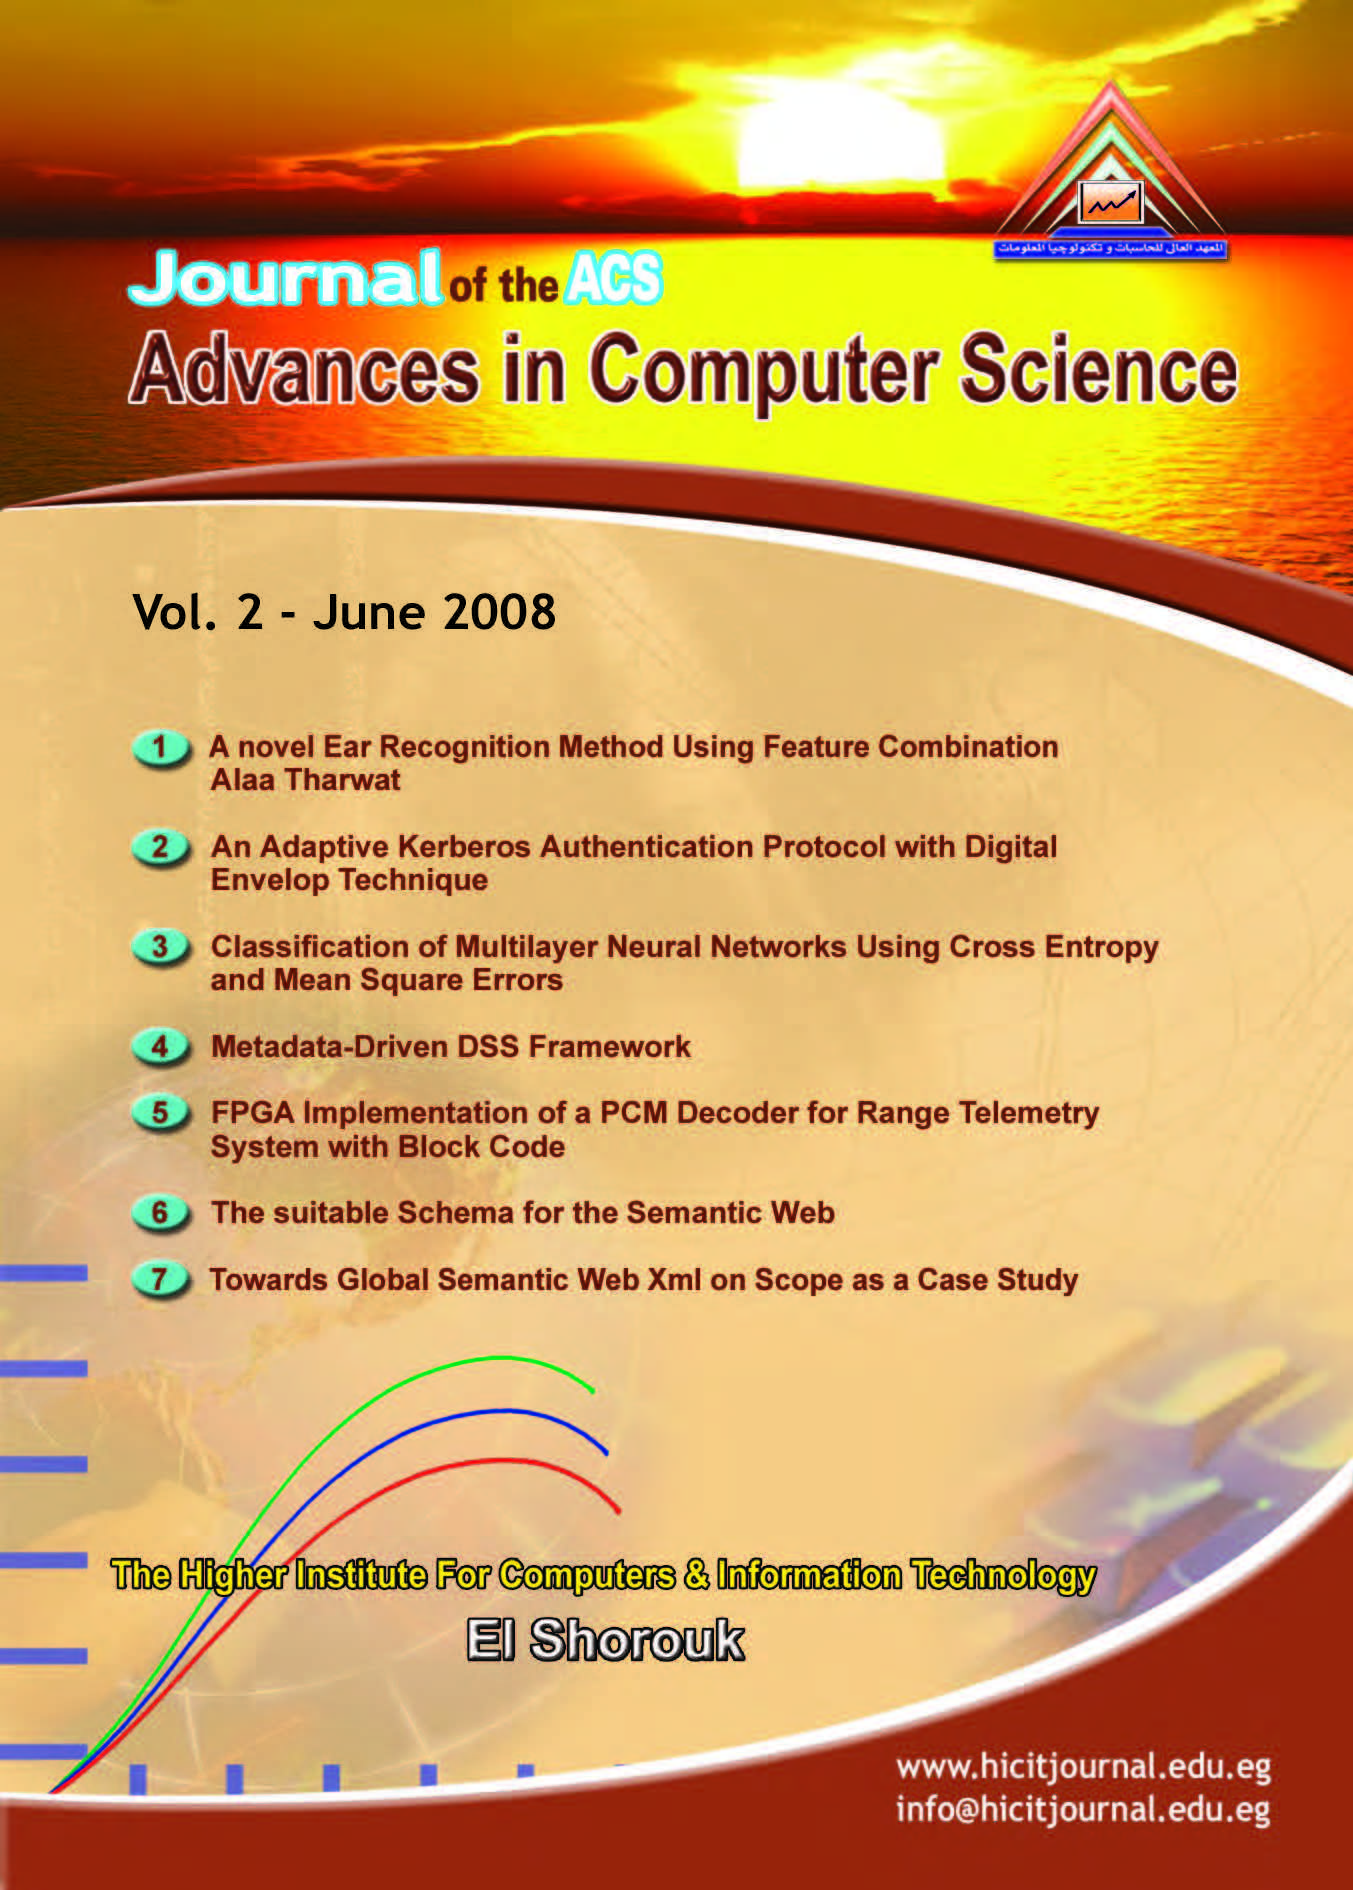 Journal of the ACS Advances in Computer Science